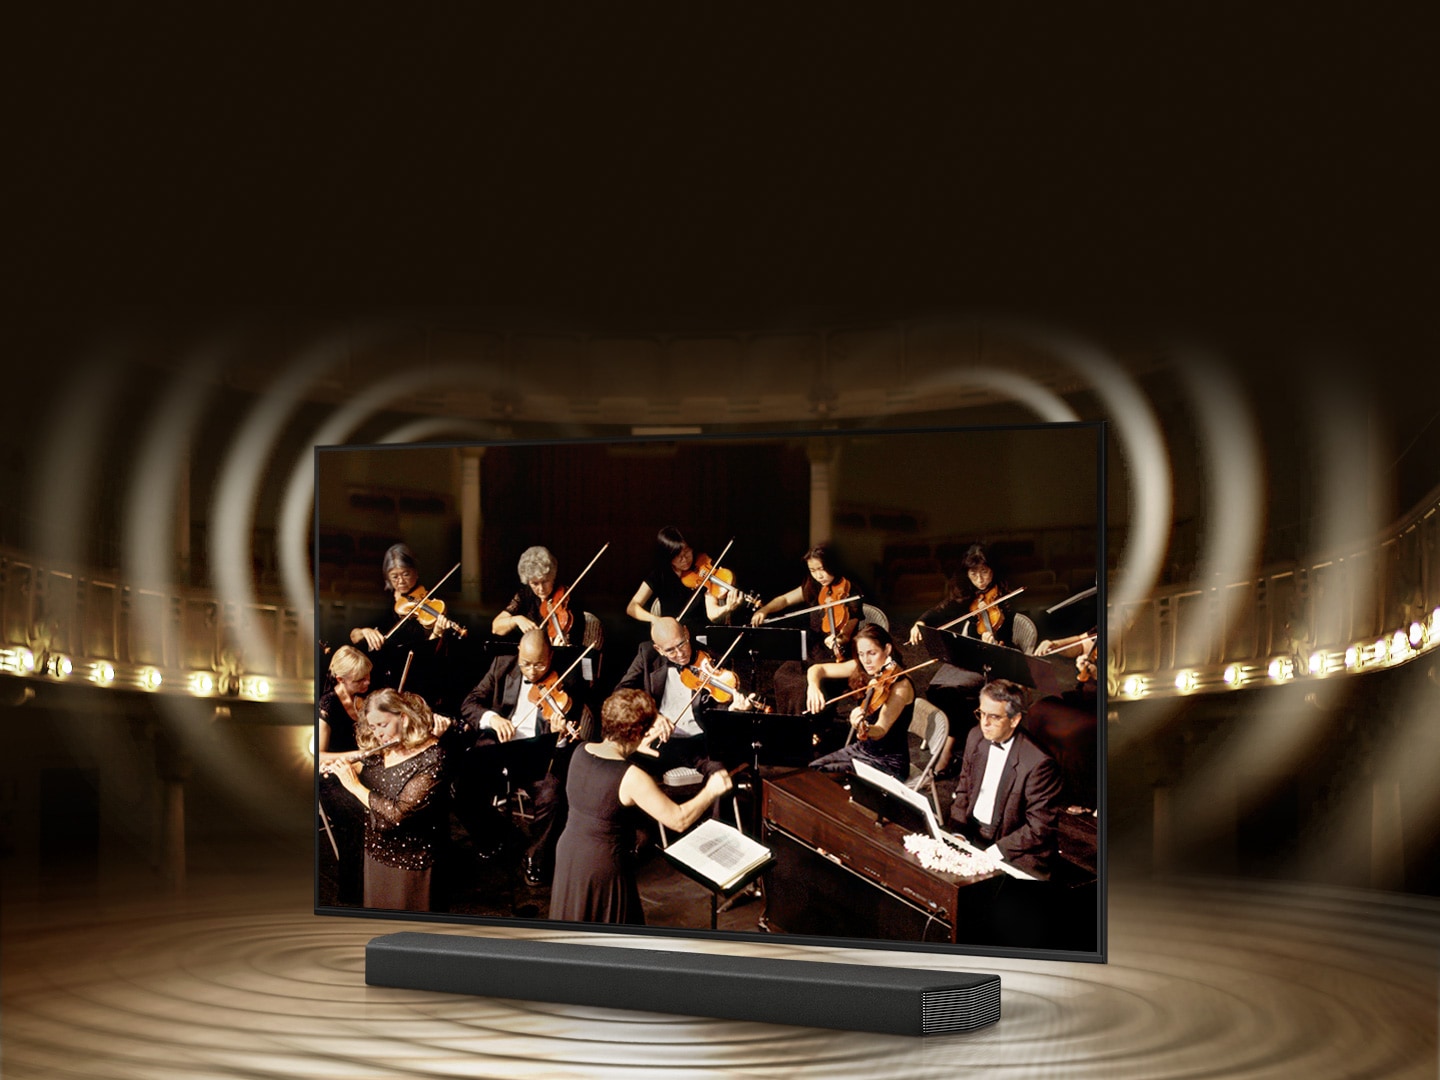 The richer sounds of synergy between TV and soundbar